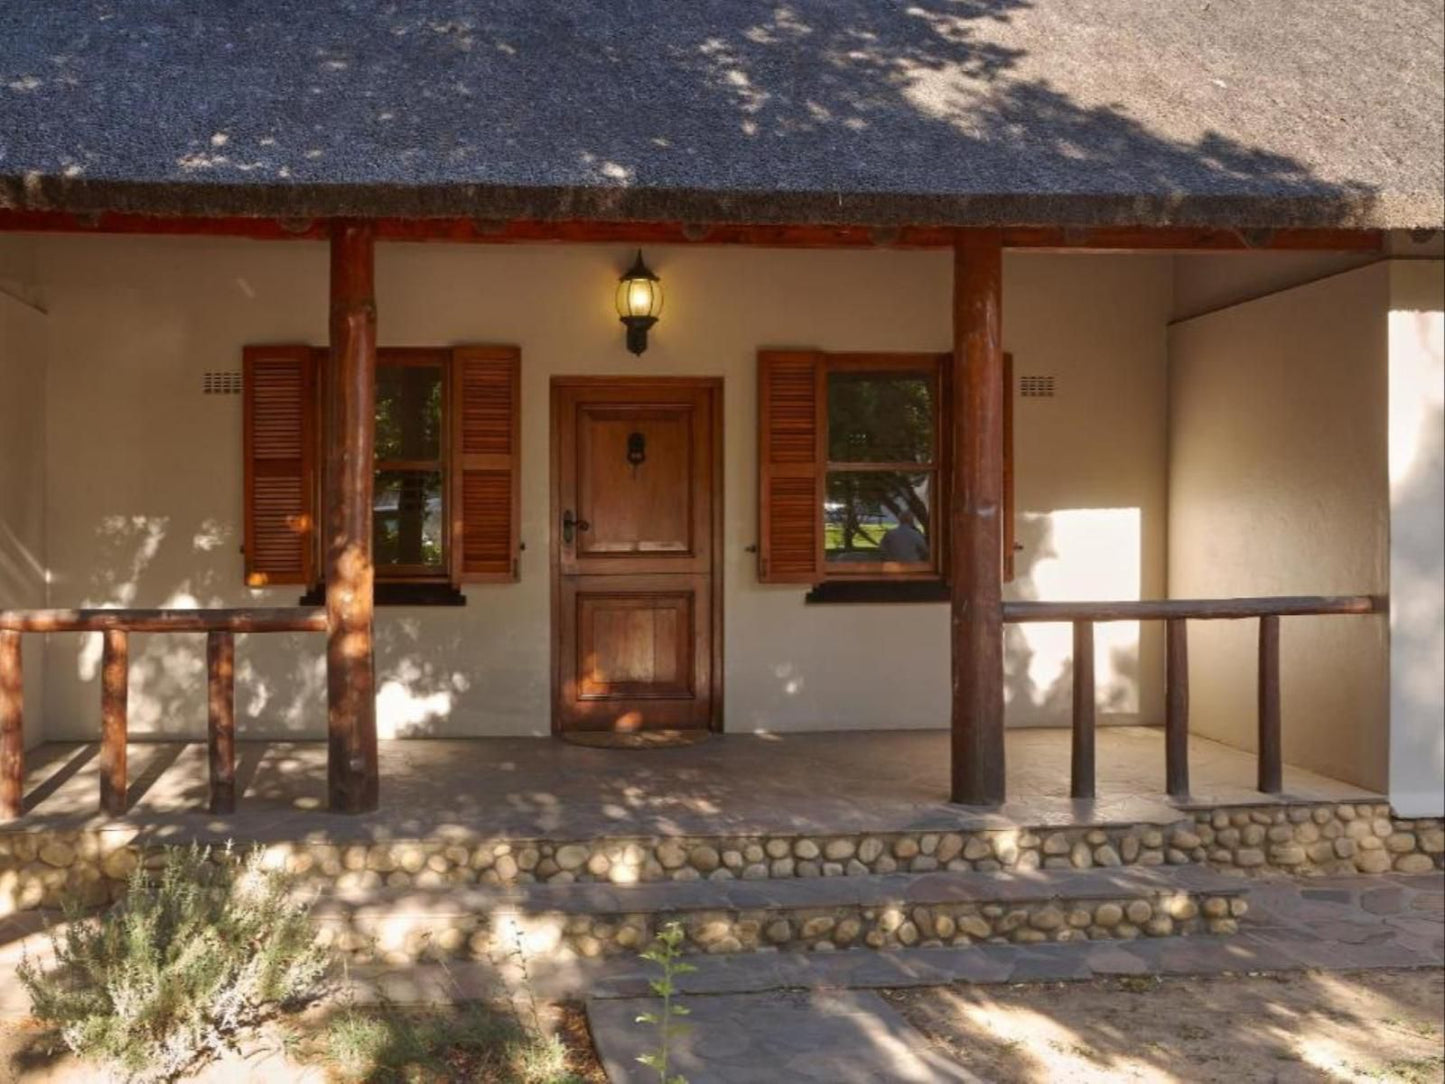 Yellow Aloe Guesthouse Clanwilliam Western Cape South Africa Cabin, Building, Architecture, House